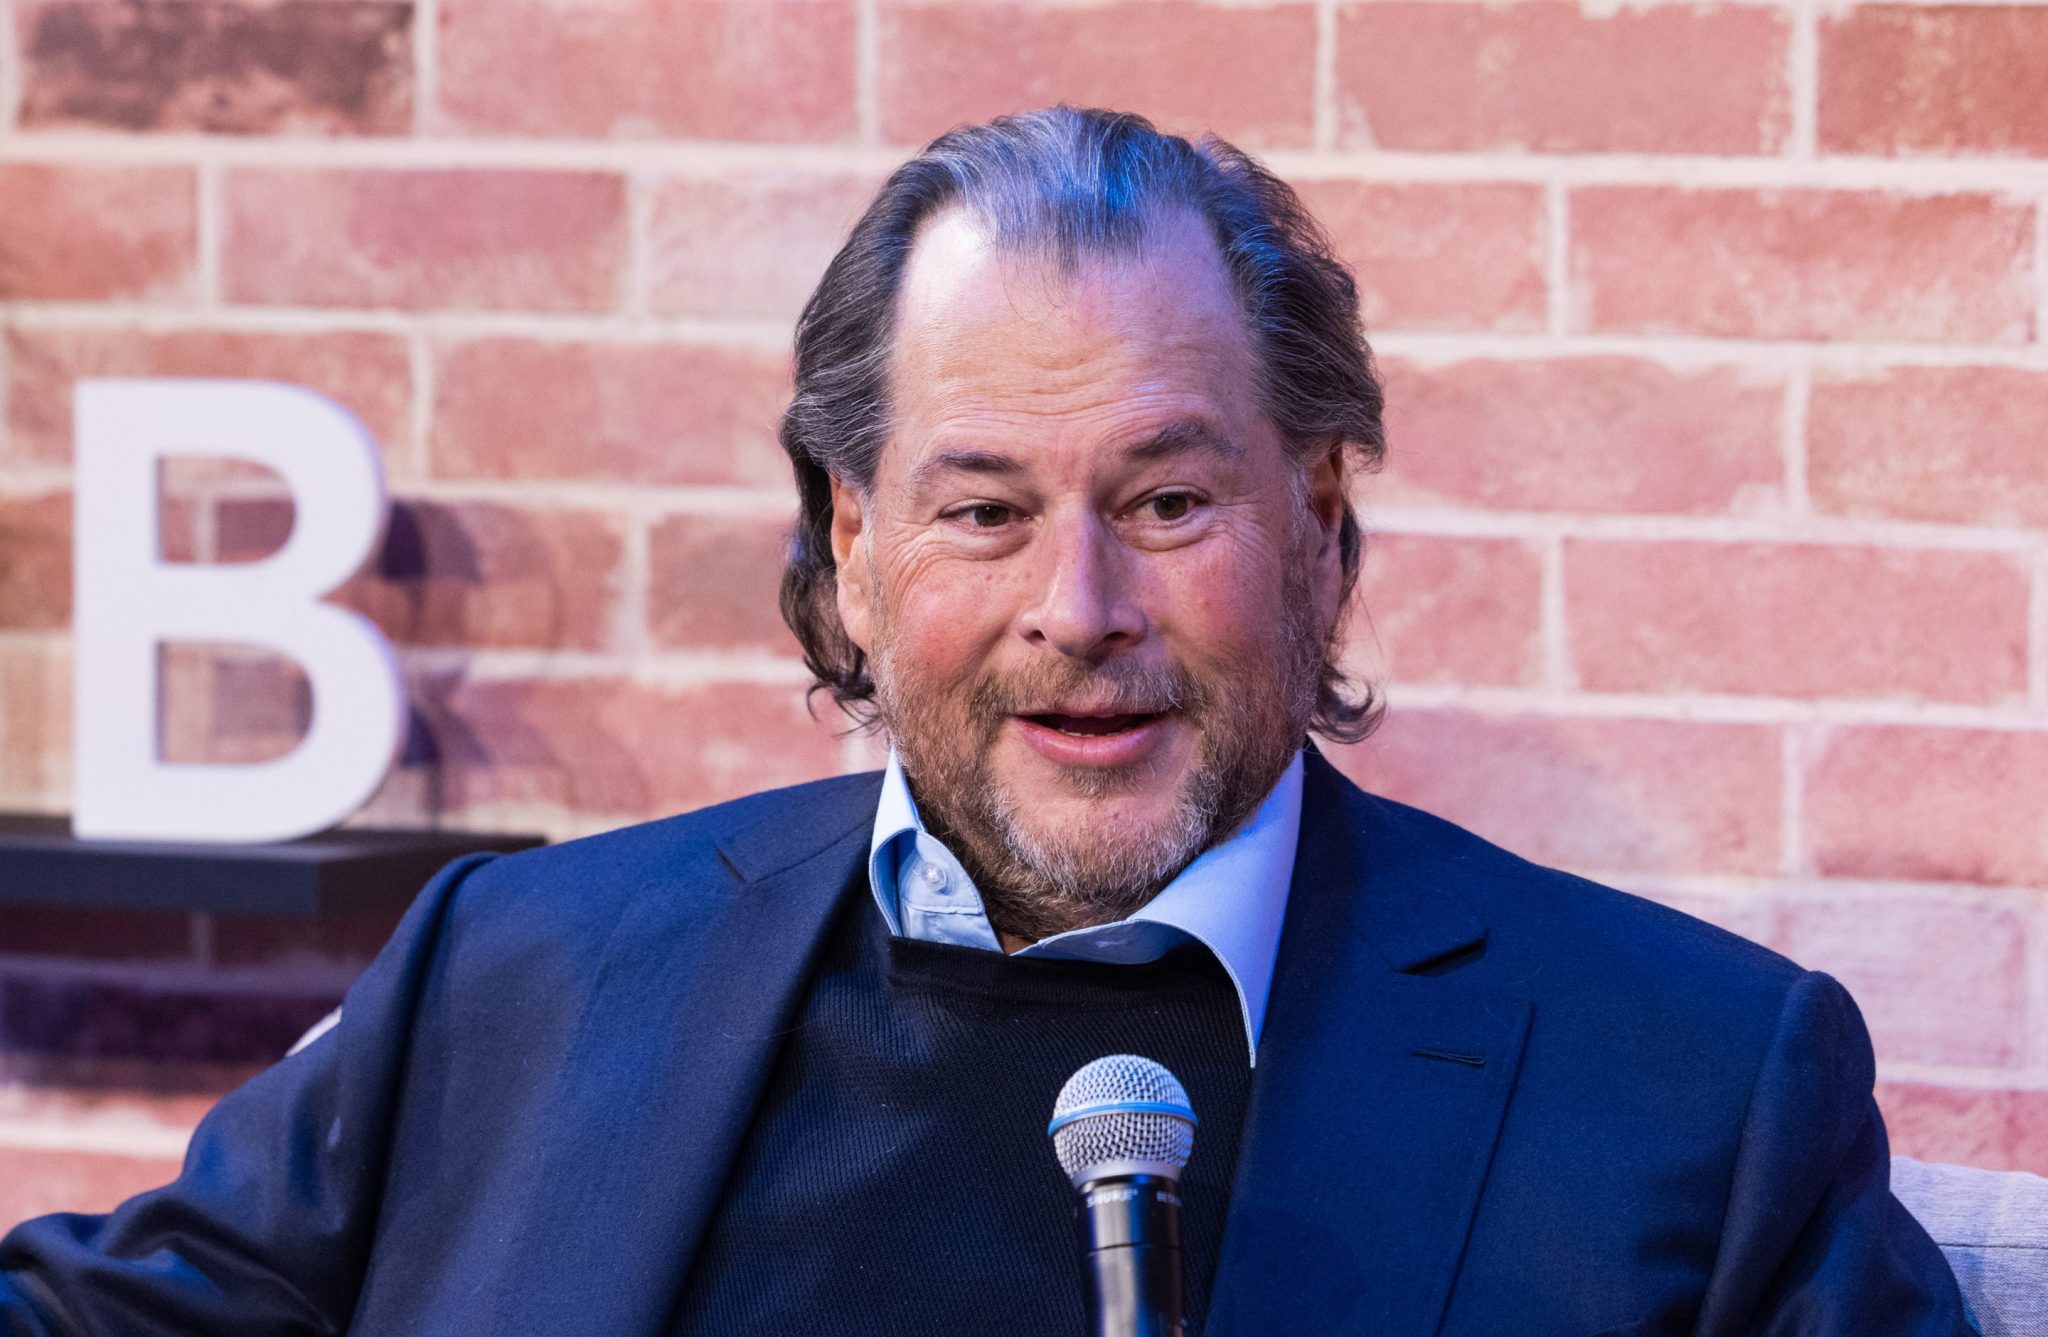 Marc Benioff replaces Warren Buffett in private lunch auction for California charity that raised $53 million